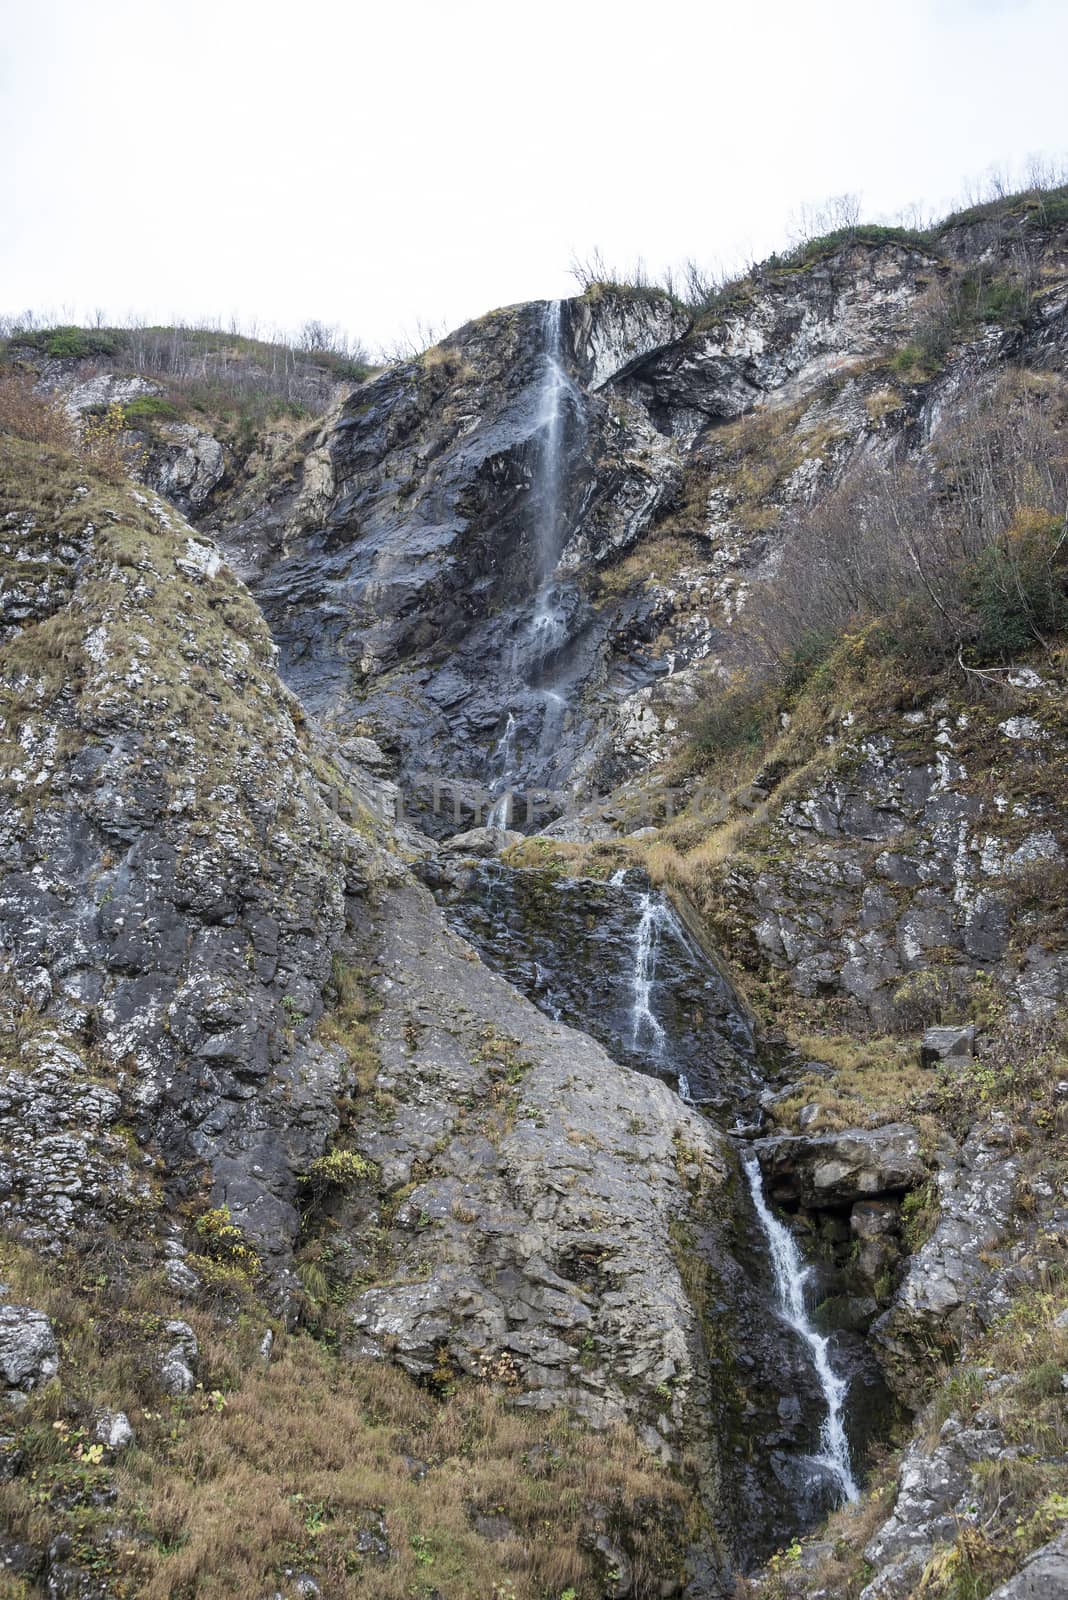 Polikarya waterfall in the Caucasus mountains near Sochi, Russia. Cloudy day 26 October 2019 by butenkow